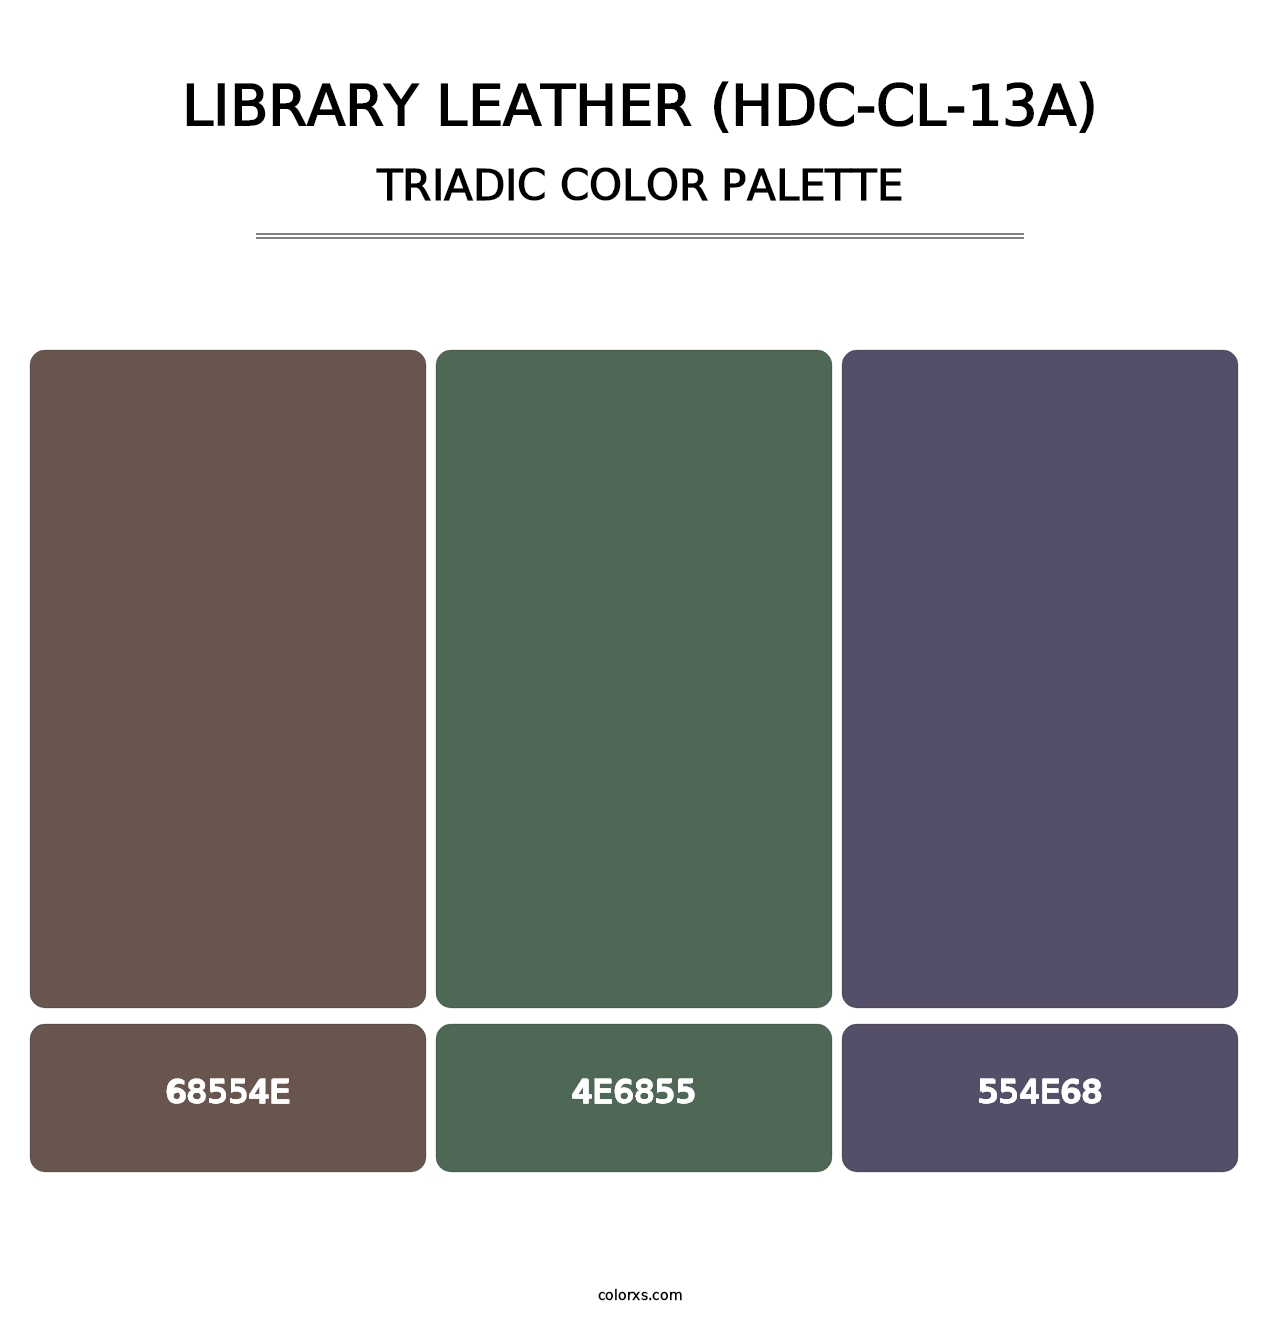 Library Leather (HDC-CL-13A) - Triadic Color Palette